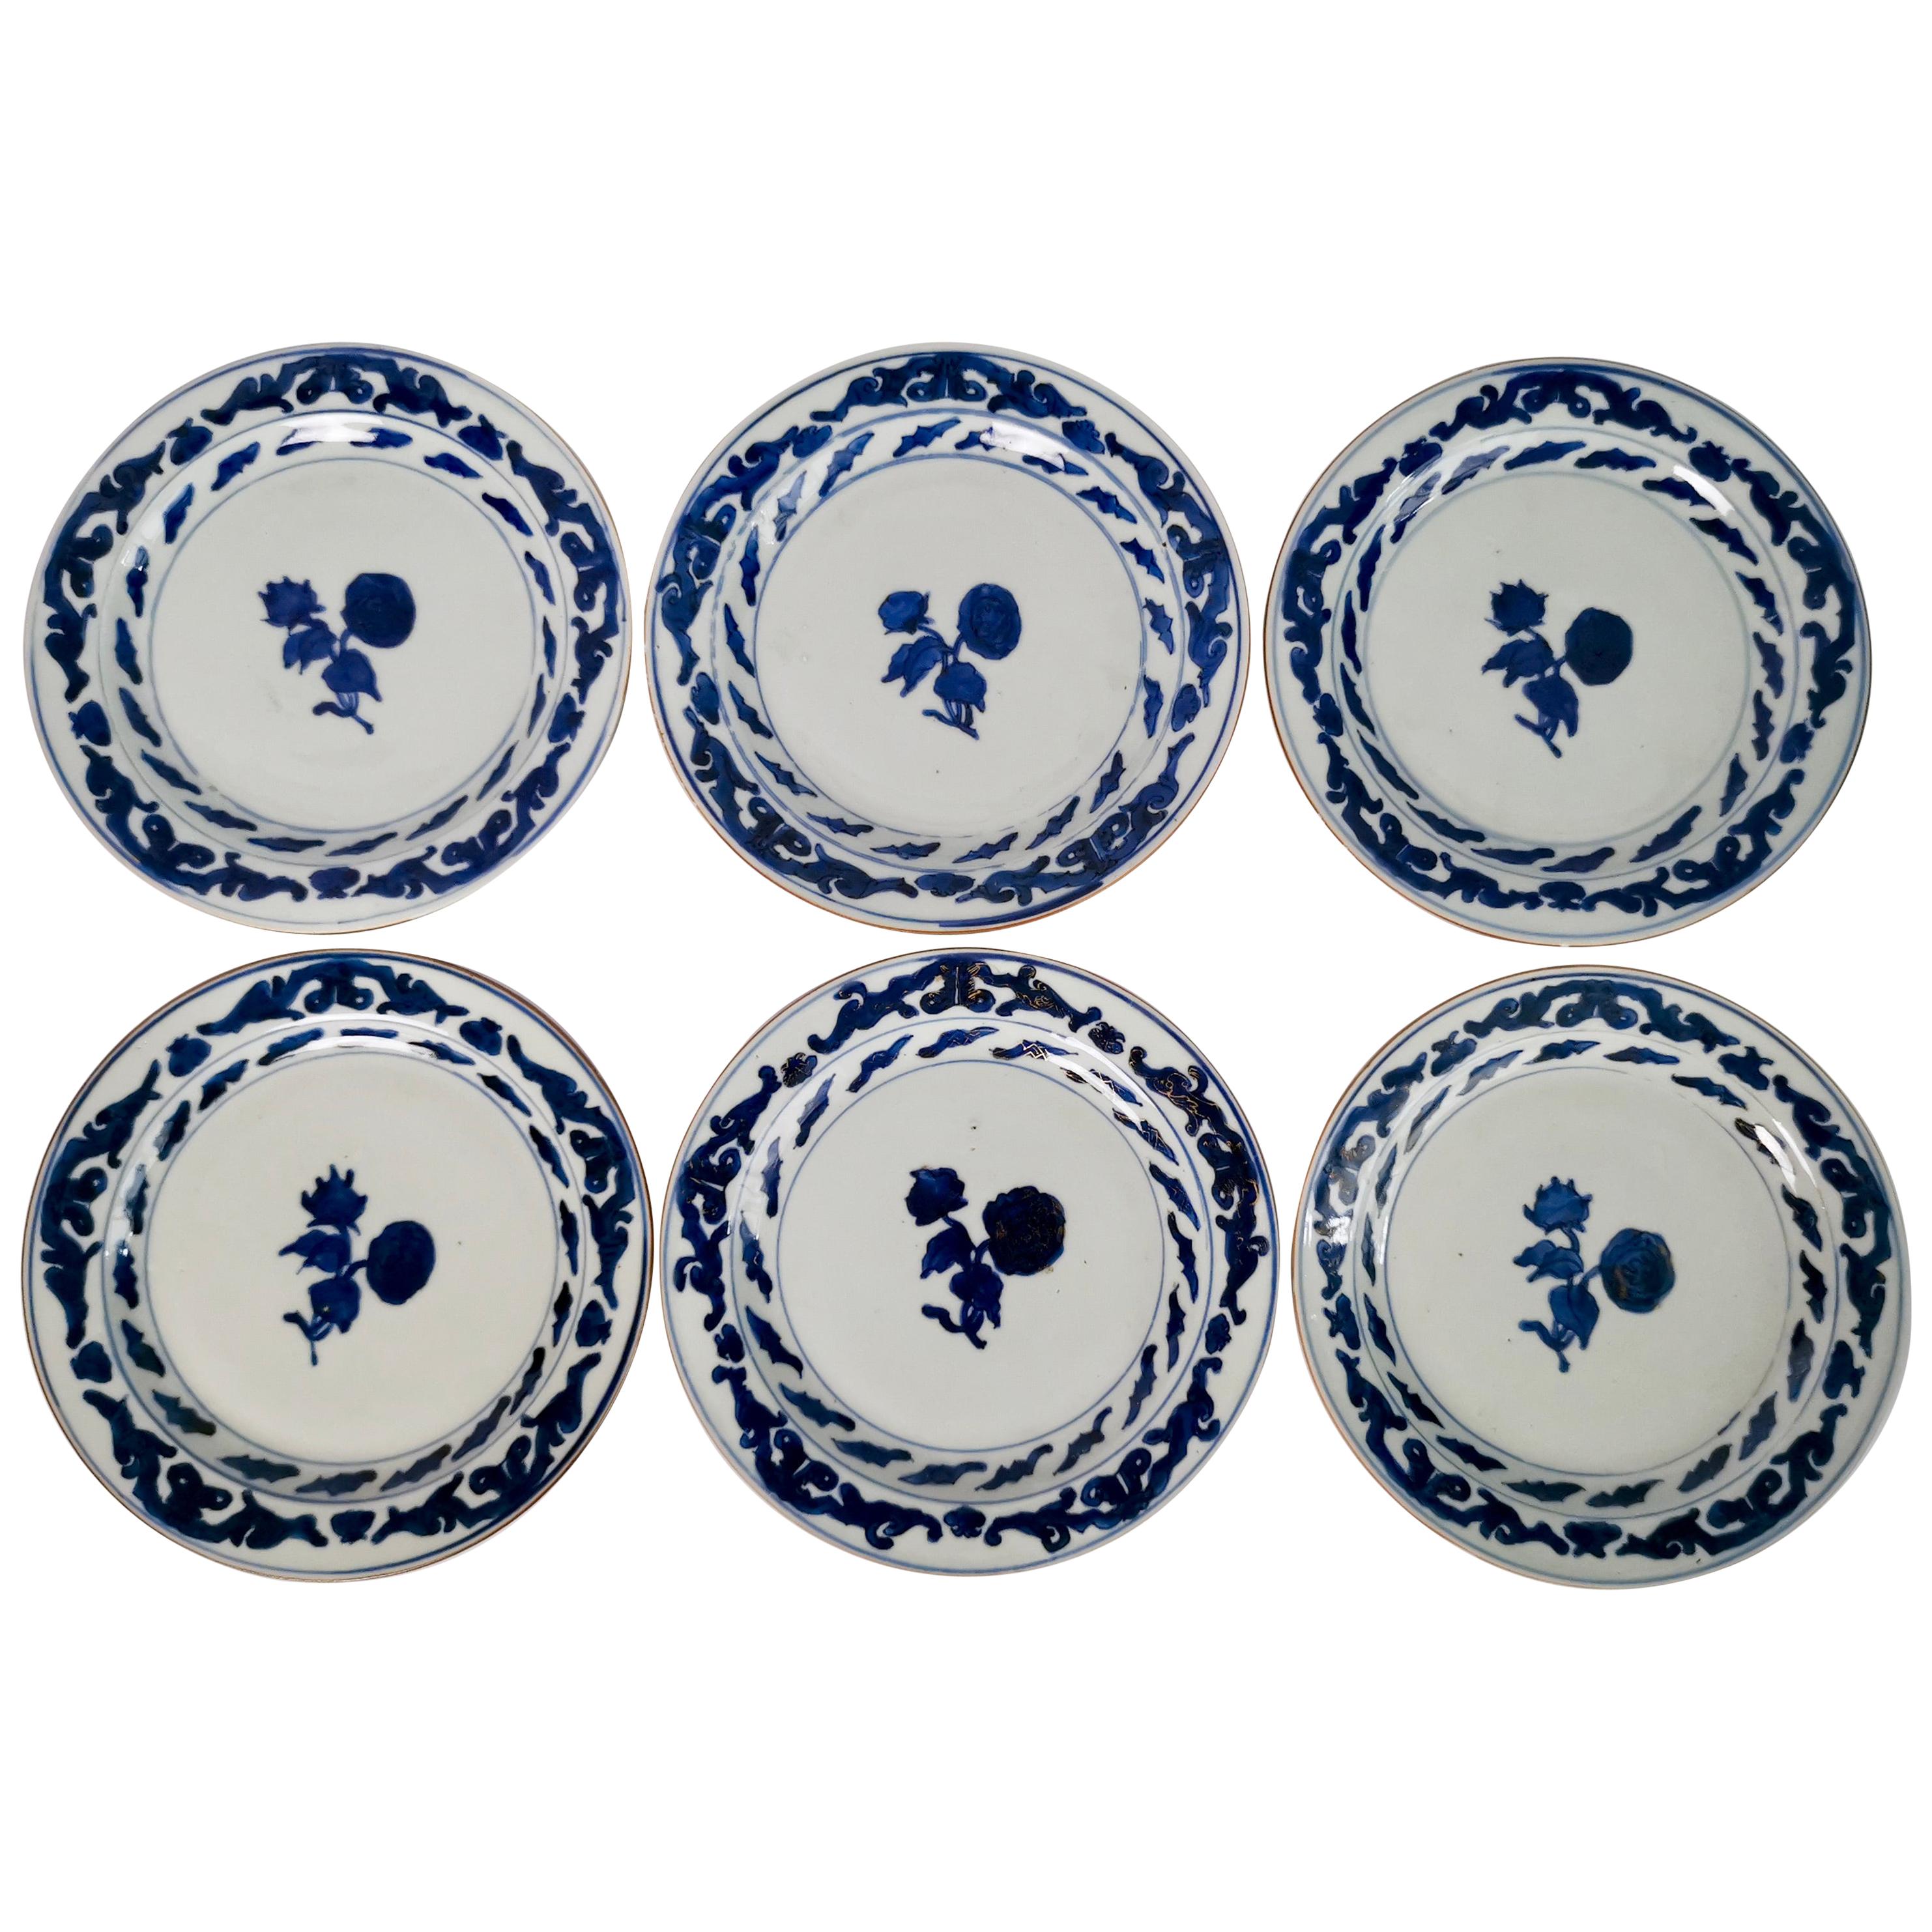 Set of 6 Chinese Export Plates, Roses Blue and White, Qianlong, circa 1780